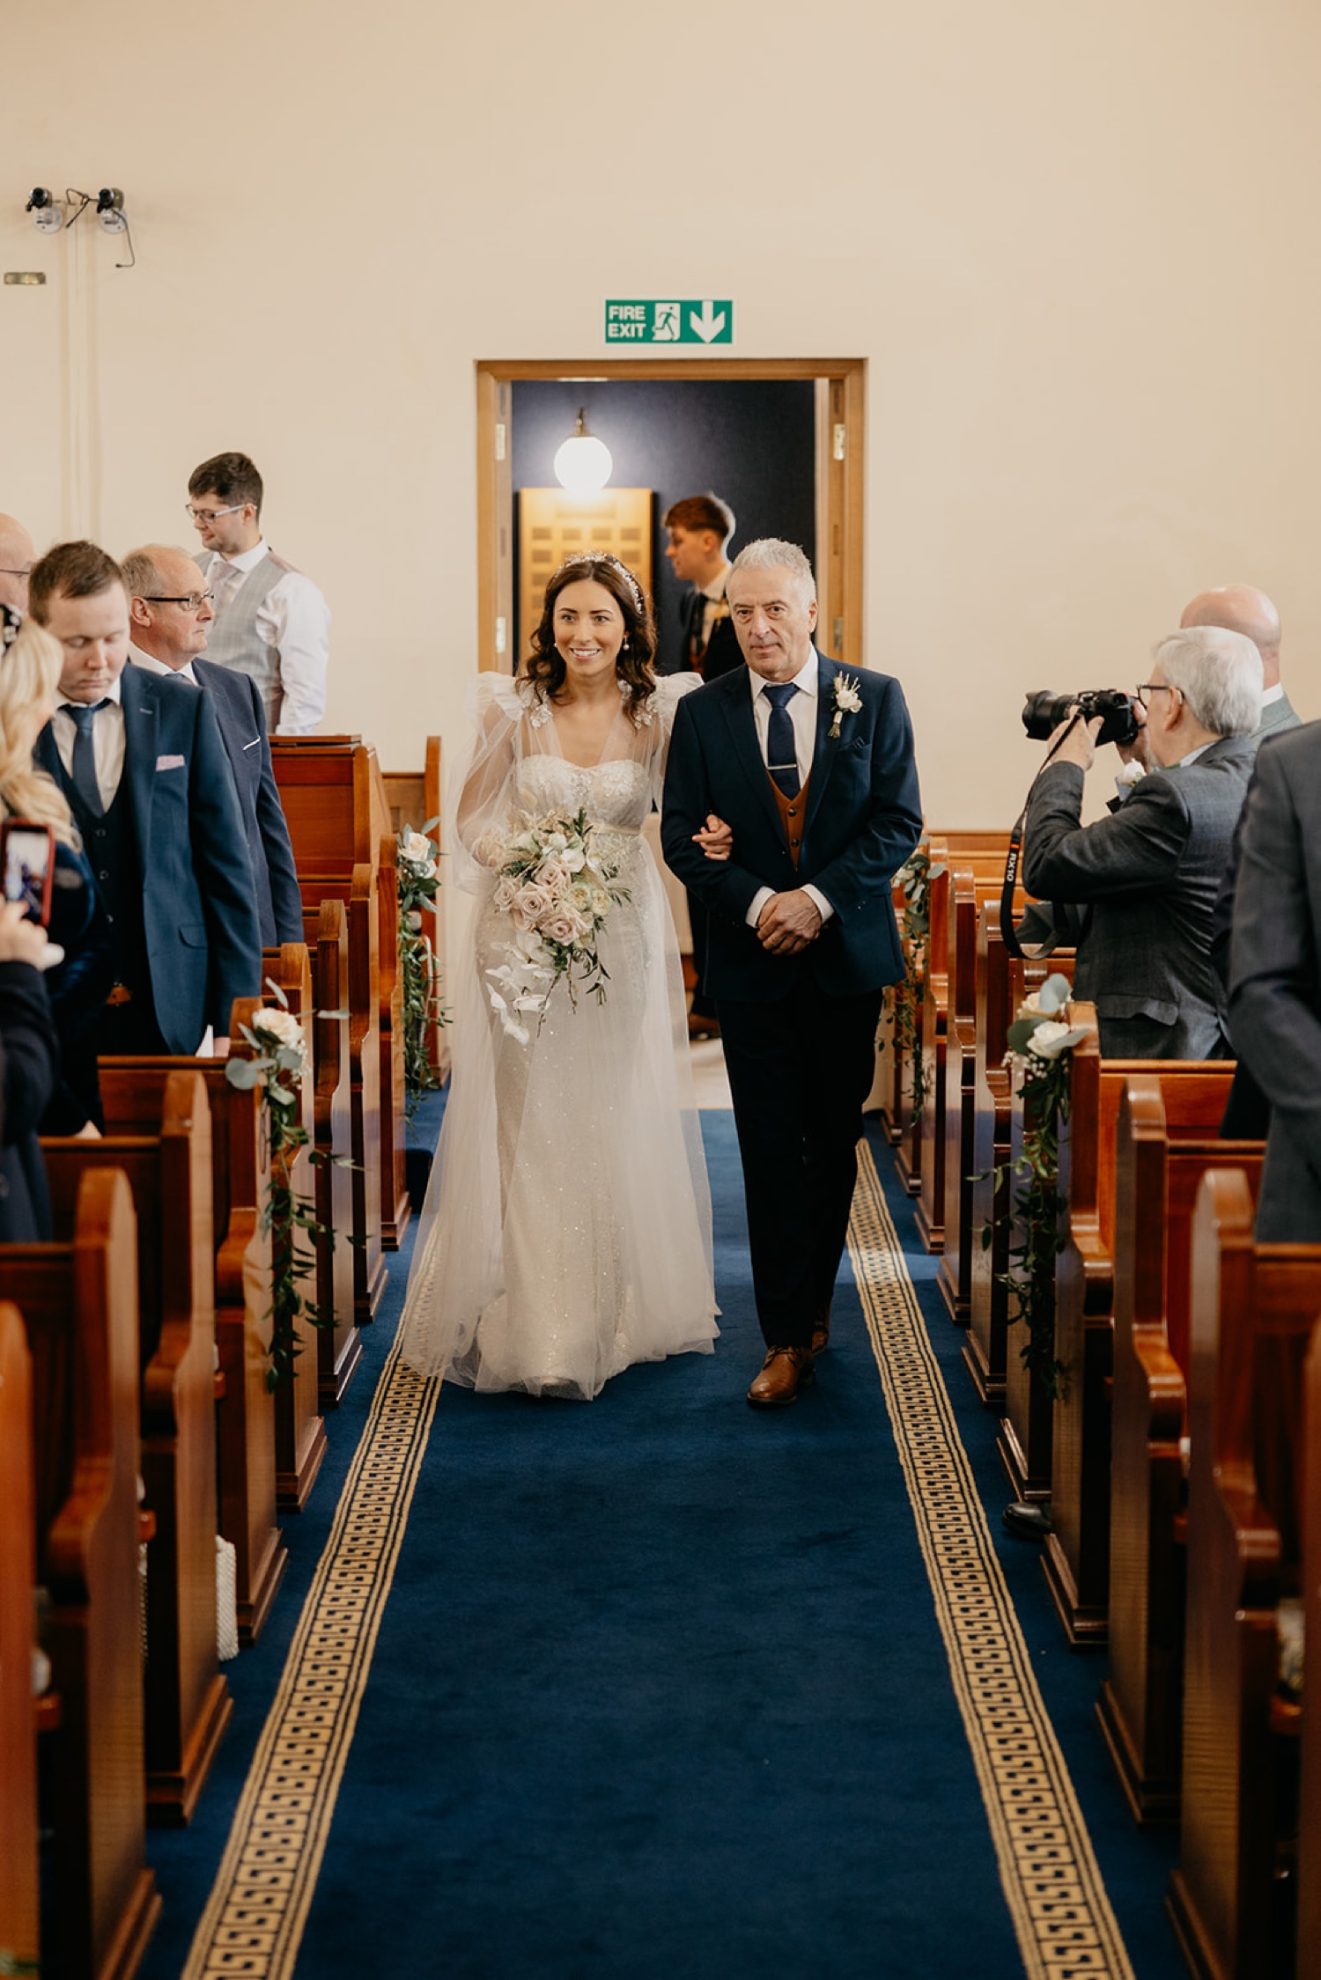 Joanne walking down the aisel with her dad to marry Ian